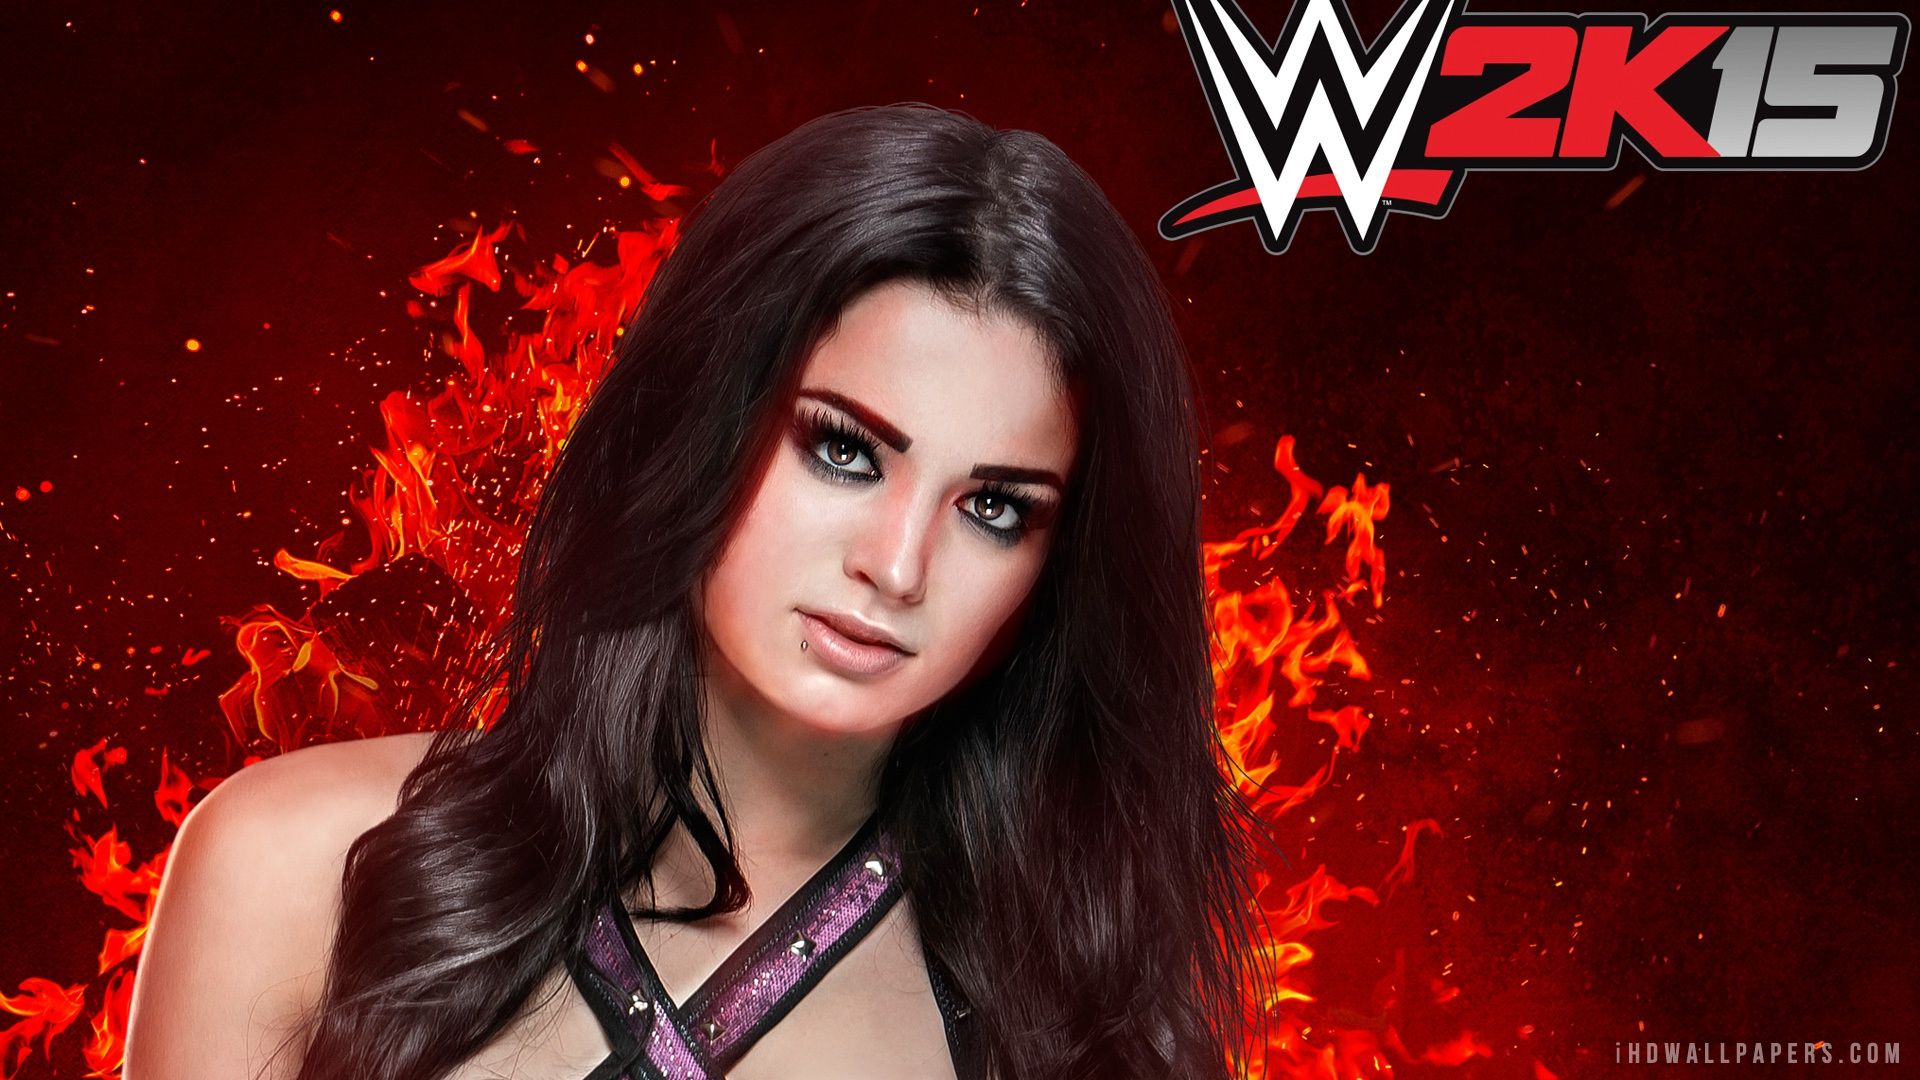 Paige Wwe 2015 Wallpapers, Paige Wwe 2015 Hd Images - Wwe 2k15 Paige , HD Wallpaper & Backgrounds